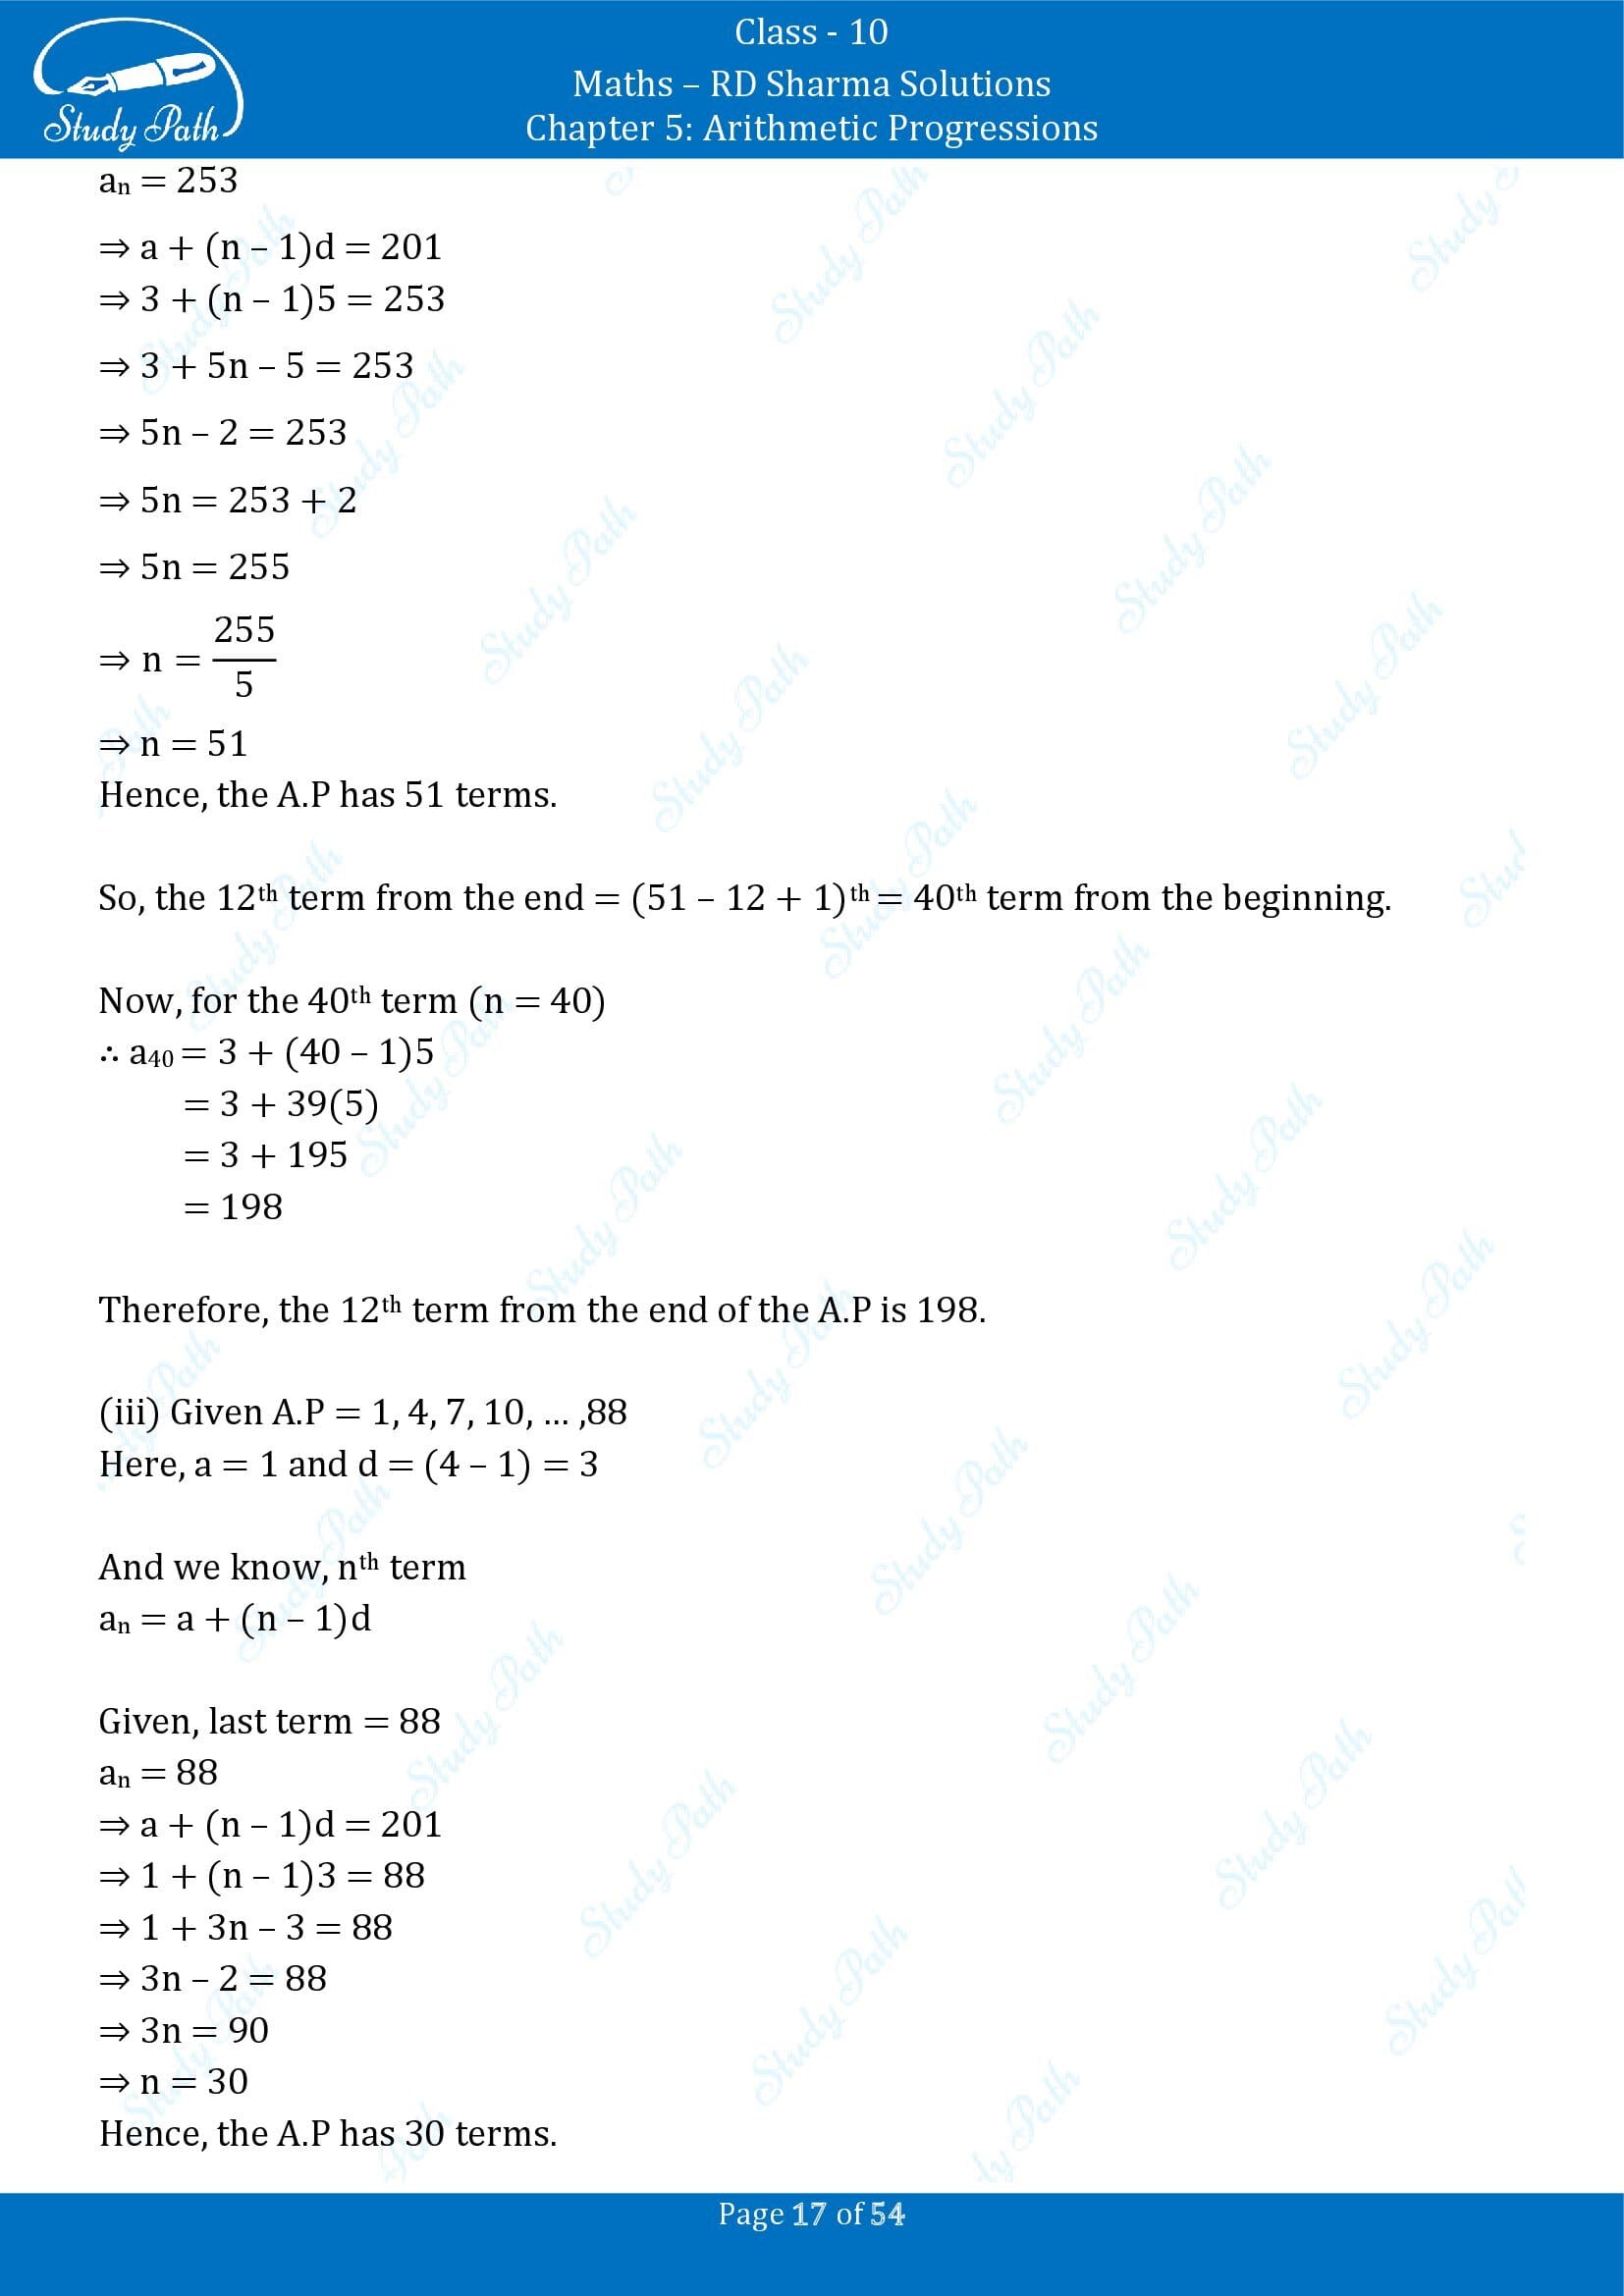 RD Sharma Solutions Class 10 Chapter 5 Arithmetic Progressions Exercise 5.4 00017